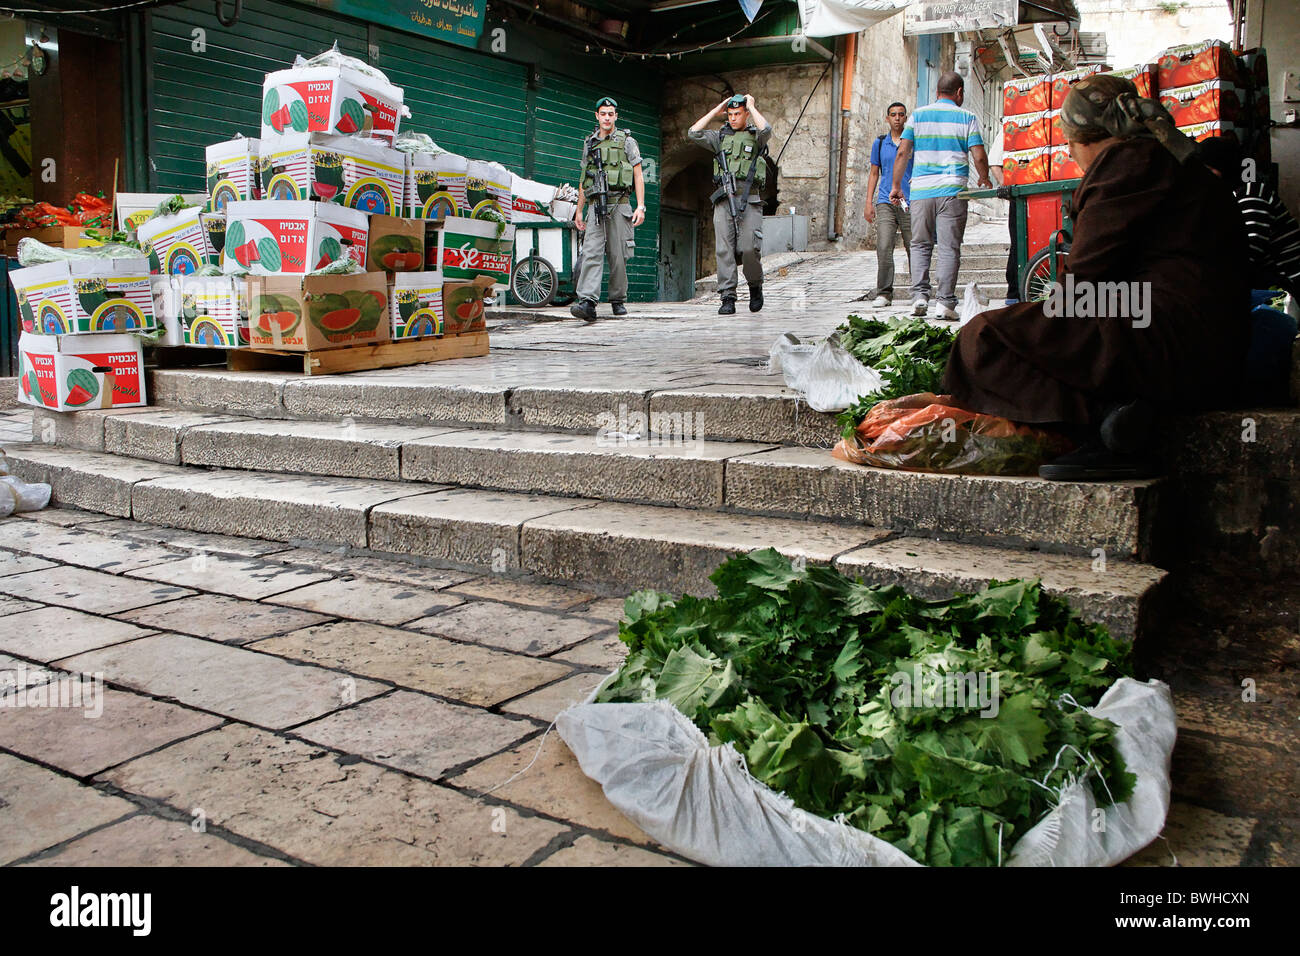 A palestinian woman selling vine leaf at the market of the old city of Jerusalem Israel Stock Photo